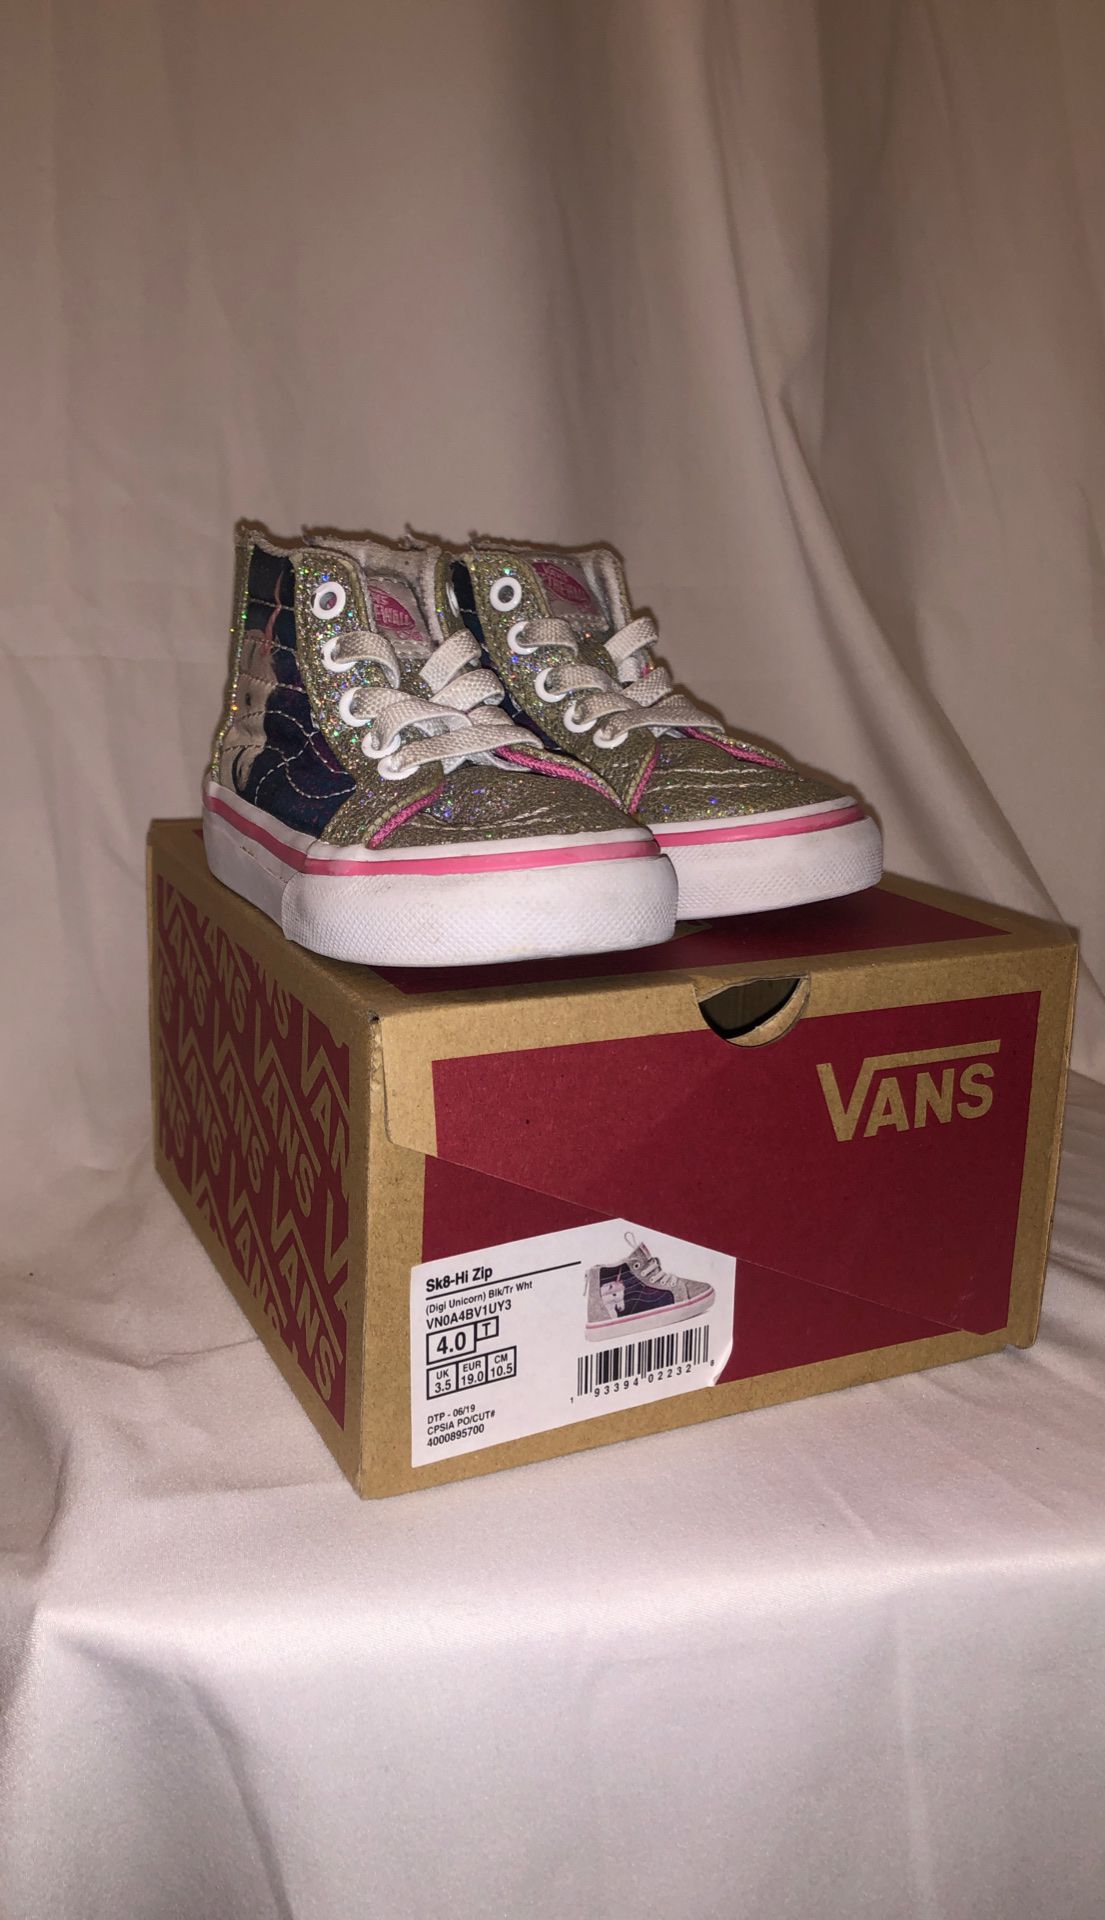 Pick up for $5! Size 4 Vans 12Months toToddler Unicorn Pink Glitter